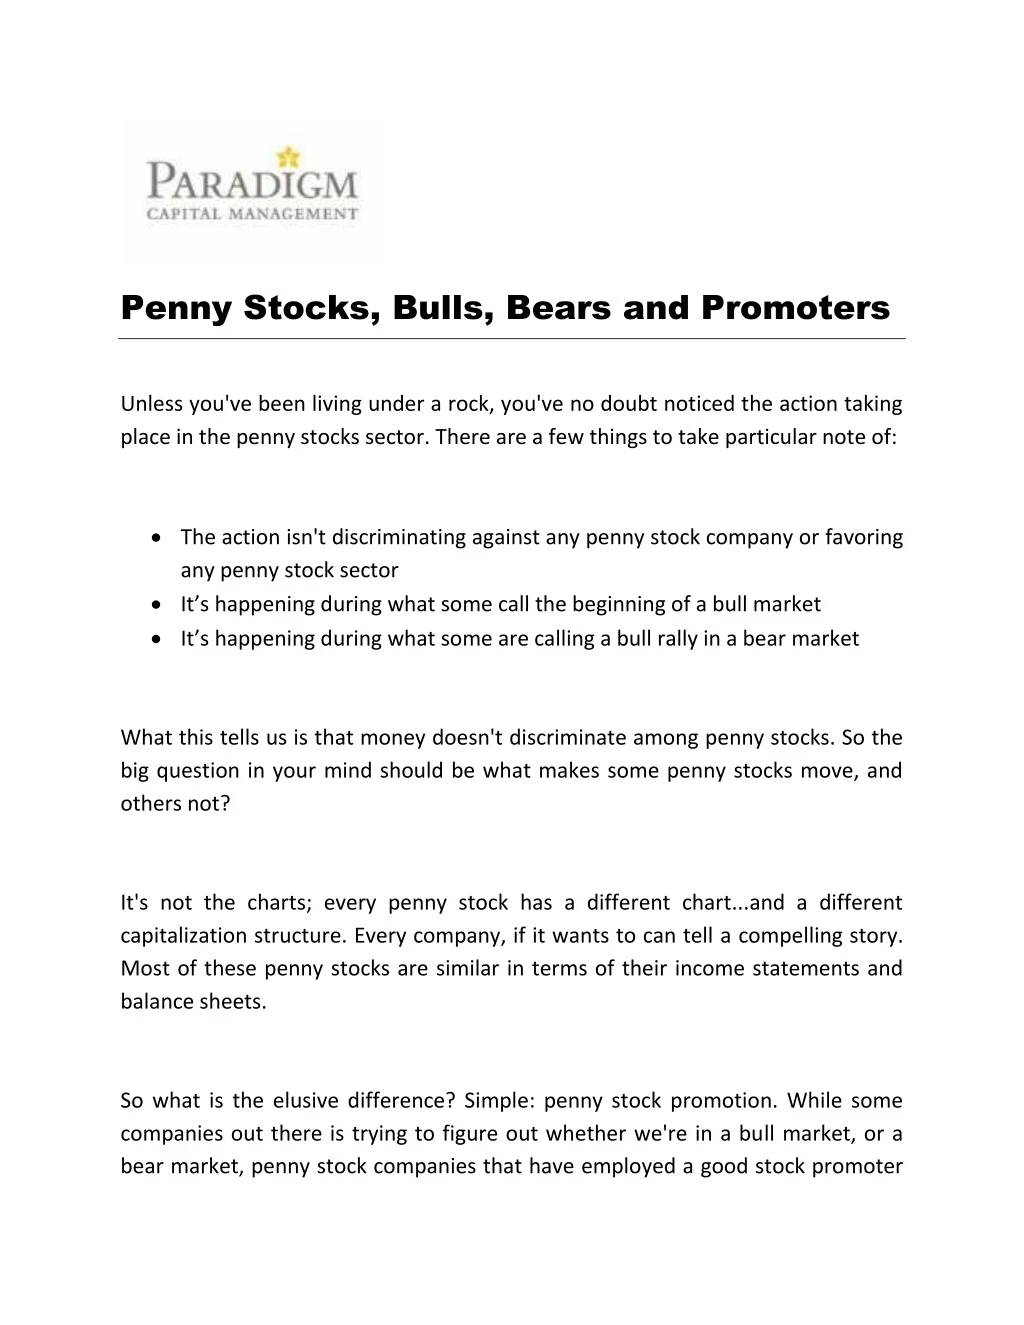 penny stocks bulls bears and promoters